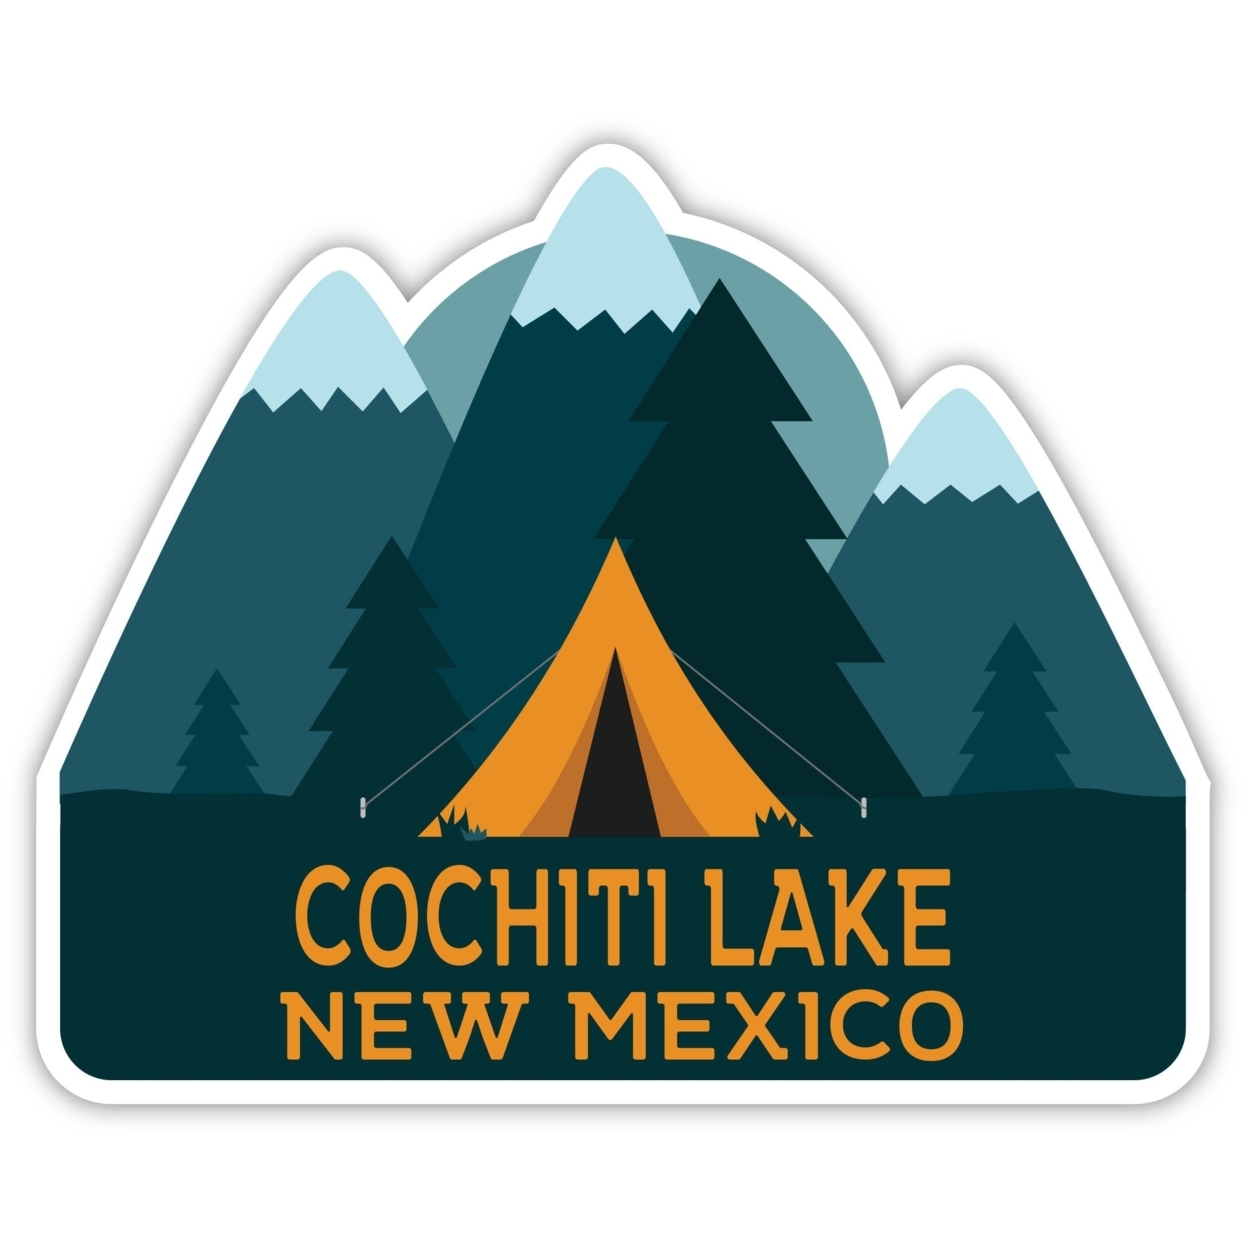 Cochiti Lake New Mexico Souvenir Decorative Stickers (Choose Theme And Size) - 4-Pack, 2-Inch, Tent